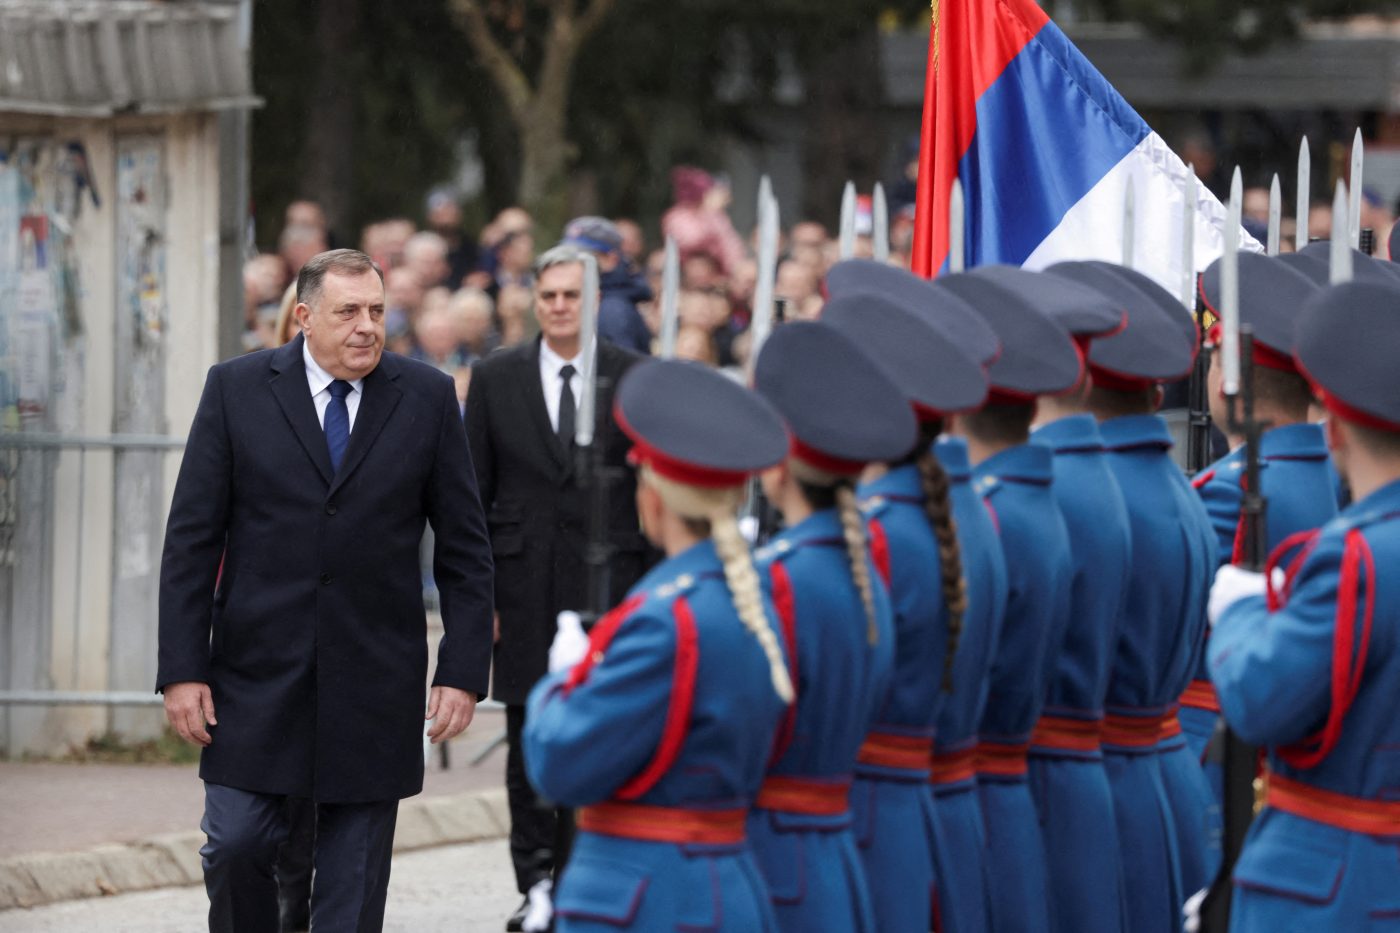 Photo: President of Republika Srpska (Serb Republic) Milorad Dodik attends Serb Republic national holiday, banned by the constitutional court, in East Sarajevo, Bosnia and Herzegovina, January 9, 2023. Credit: REUTERS/Dado Ruvic REFILE-CORRECTING TITLE